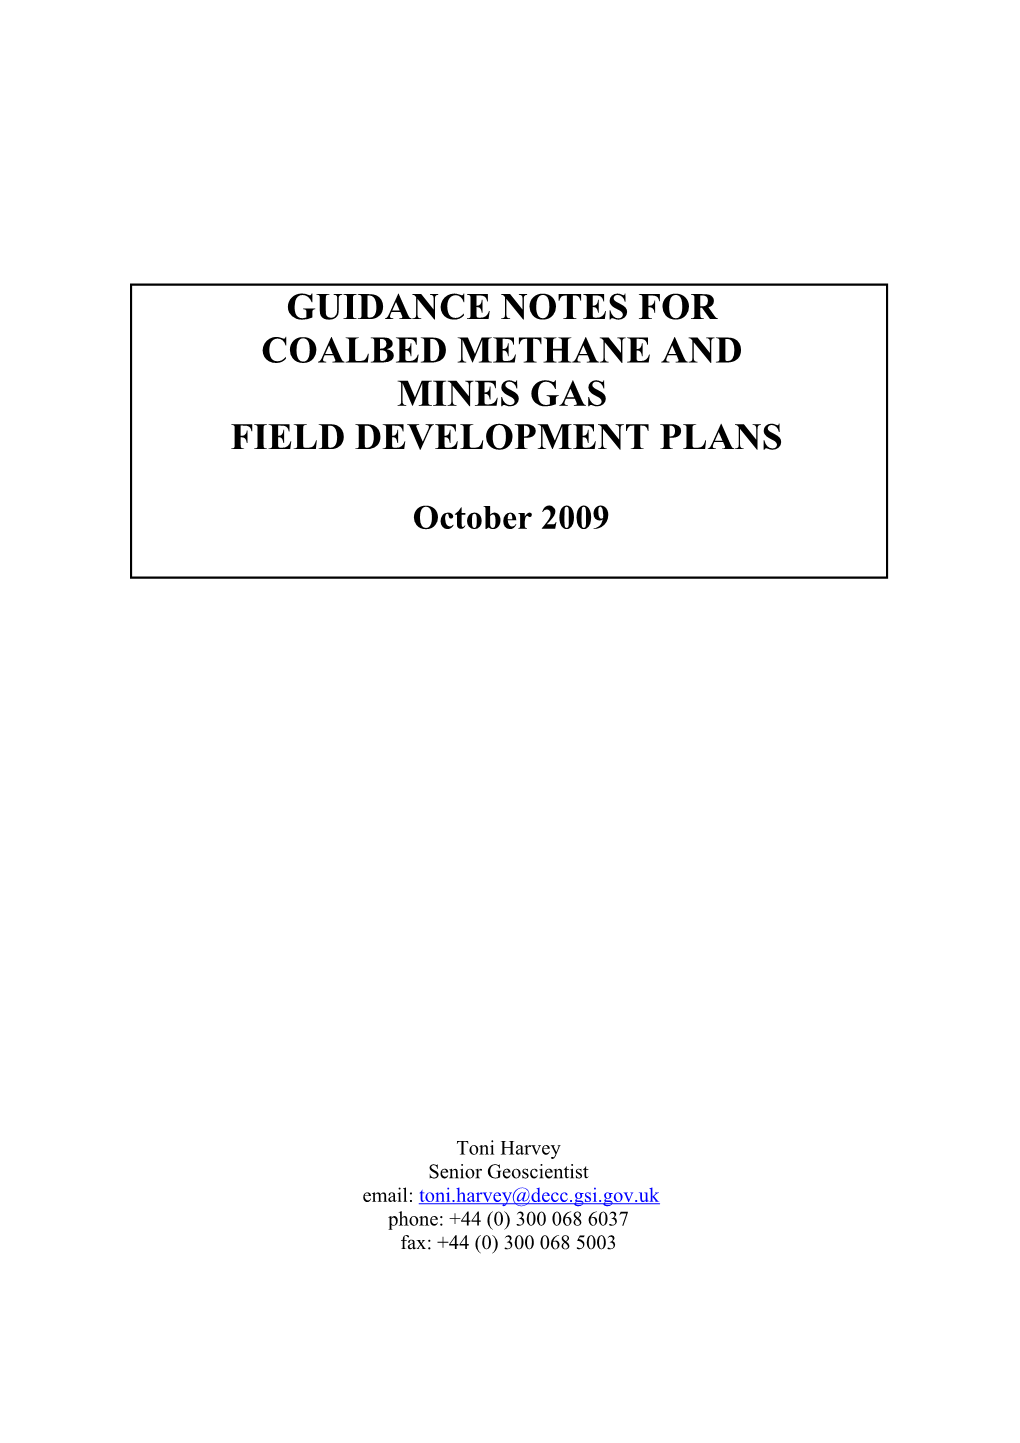 Notes on Procedures for Regulating Oil and Gas Field Developments